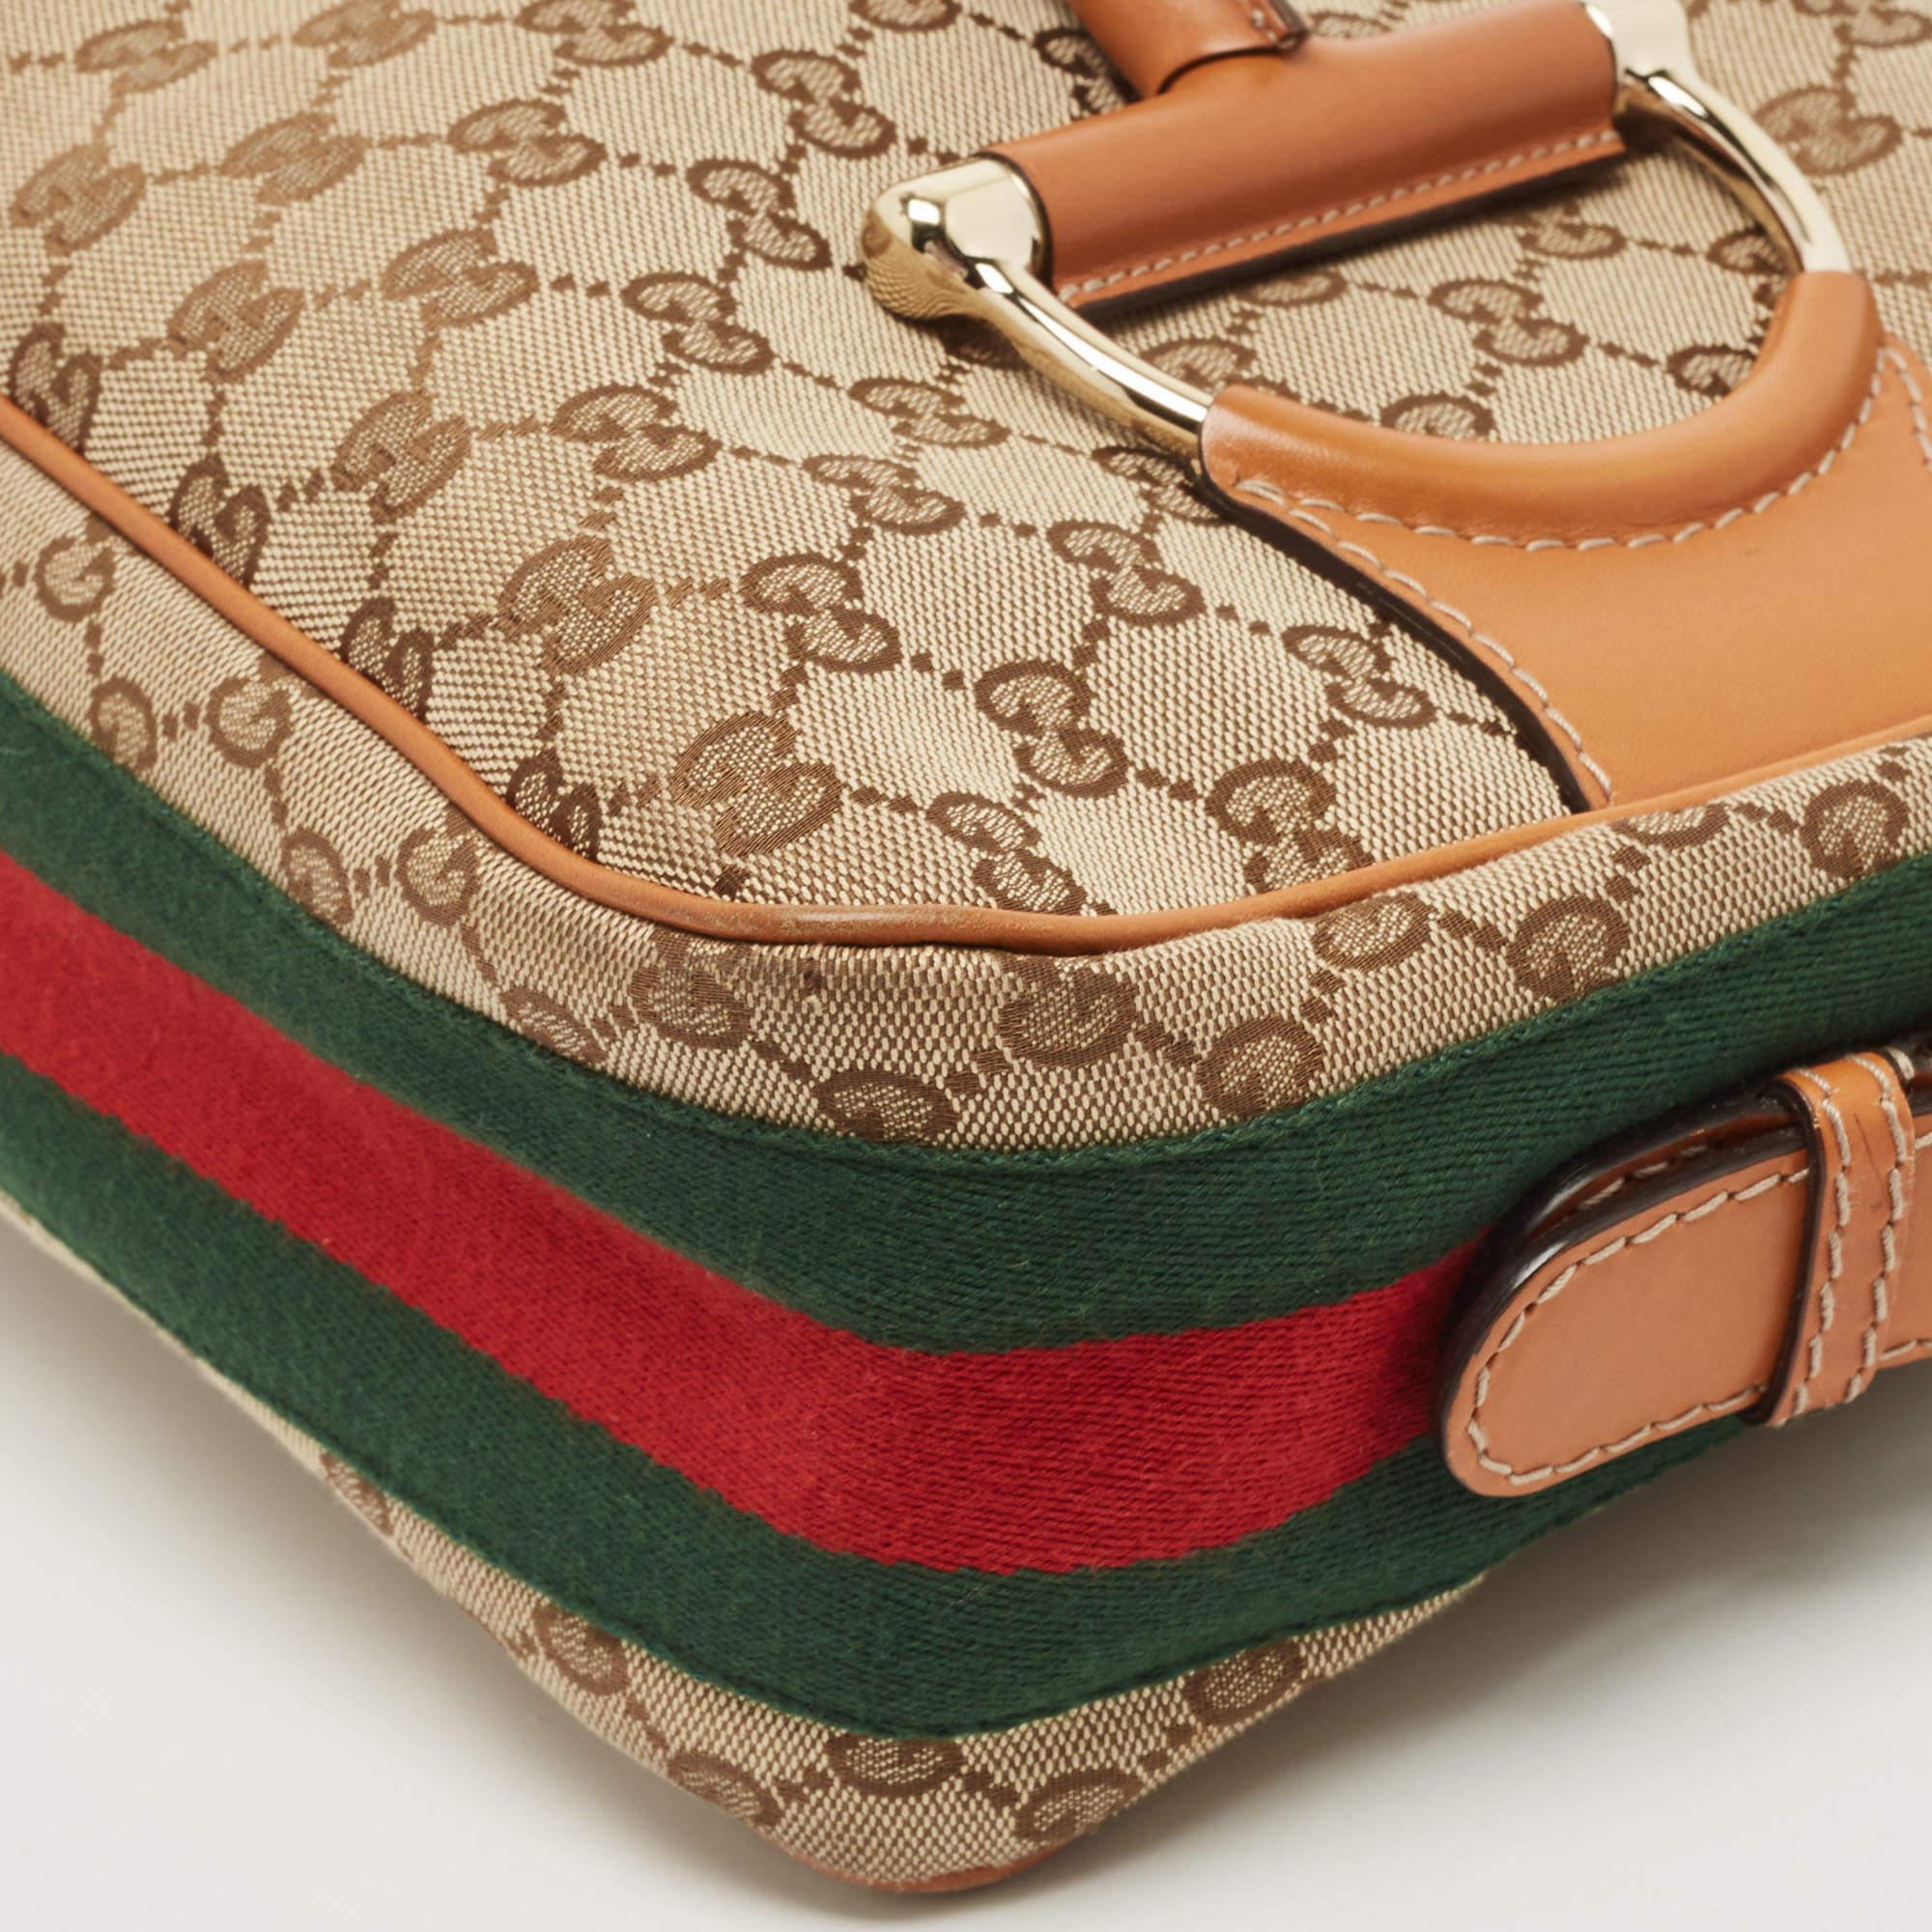 Brimming with signature details of the brand, this Heritage hobo from Gucci continues to remain in prominence. It is created with the brown-beige GG canvas and leather on the exterior with a Web strap detailing. The Horsebit motif decorates the